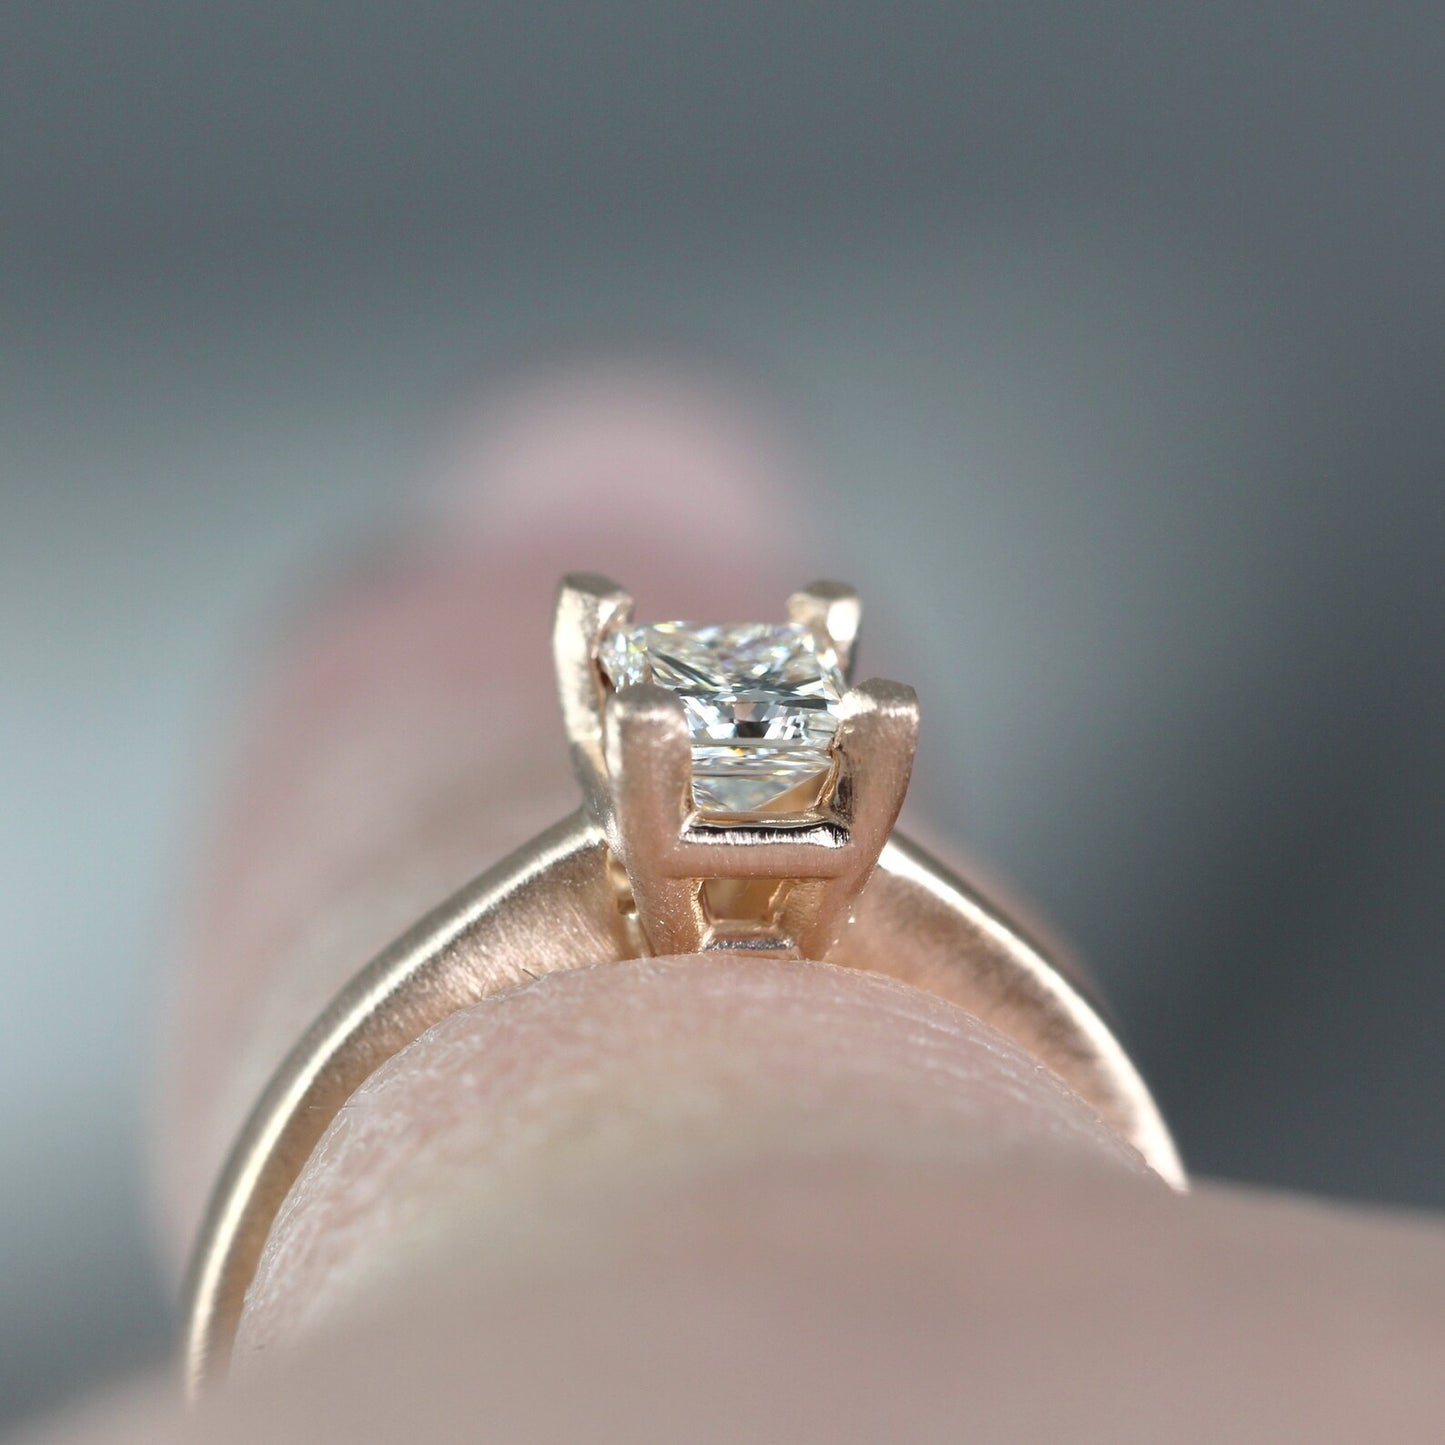 Princess Cut Diamond Solitaire Engagement Ring - 14K Rose Gold - 1/2 carat Canadian diamond - Made in Canada